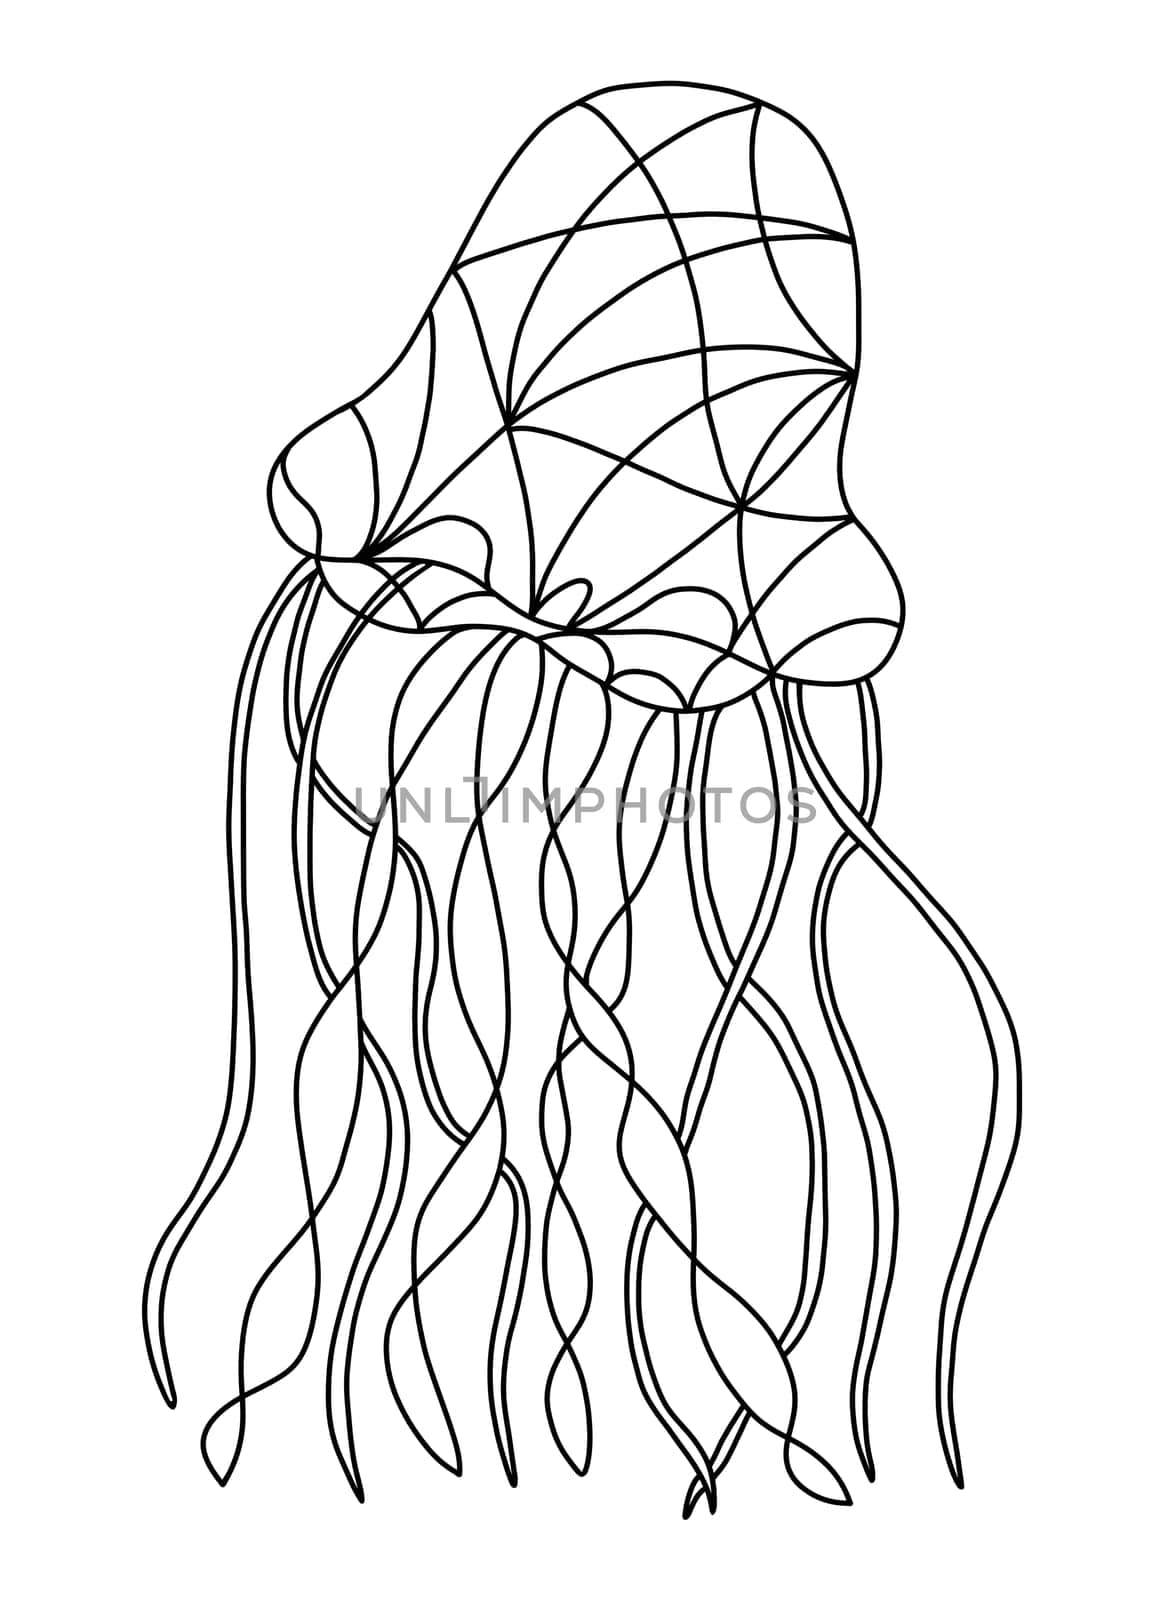 Outline Illustration of Jellyfish in Stained Glass Window Style. by Rina_Dozornaya